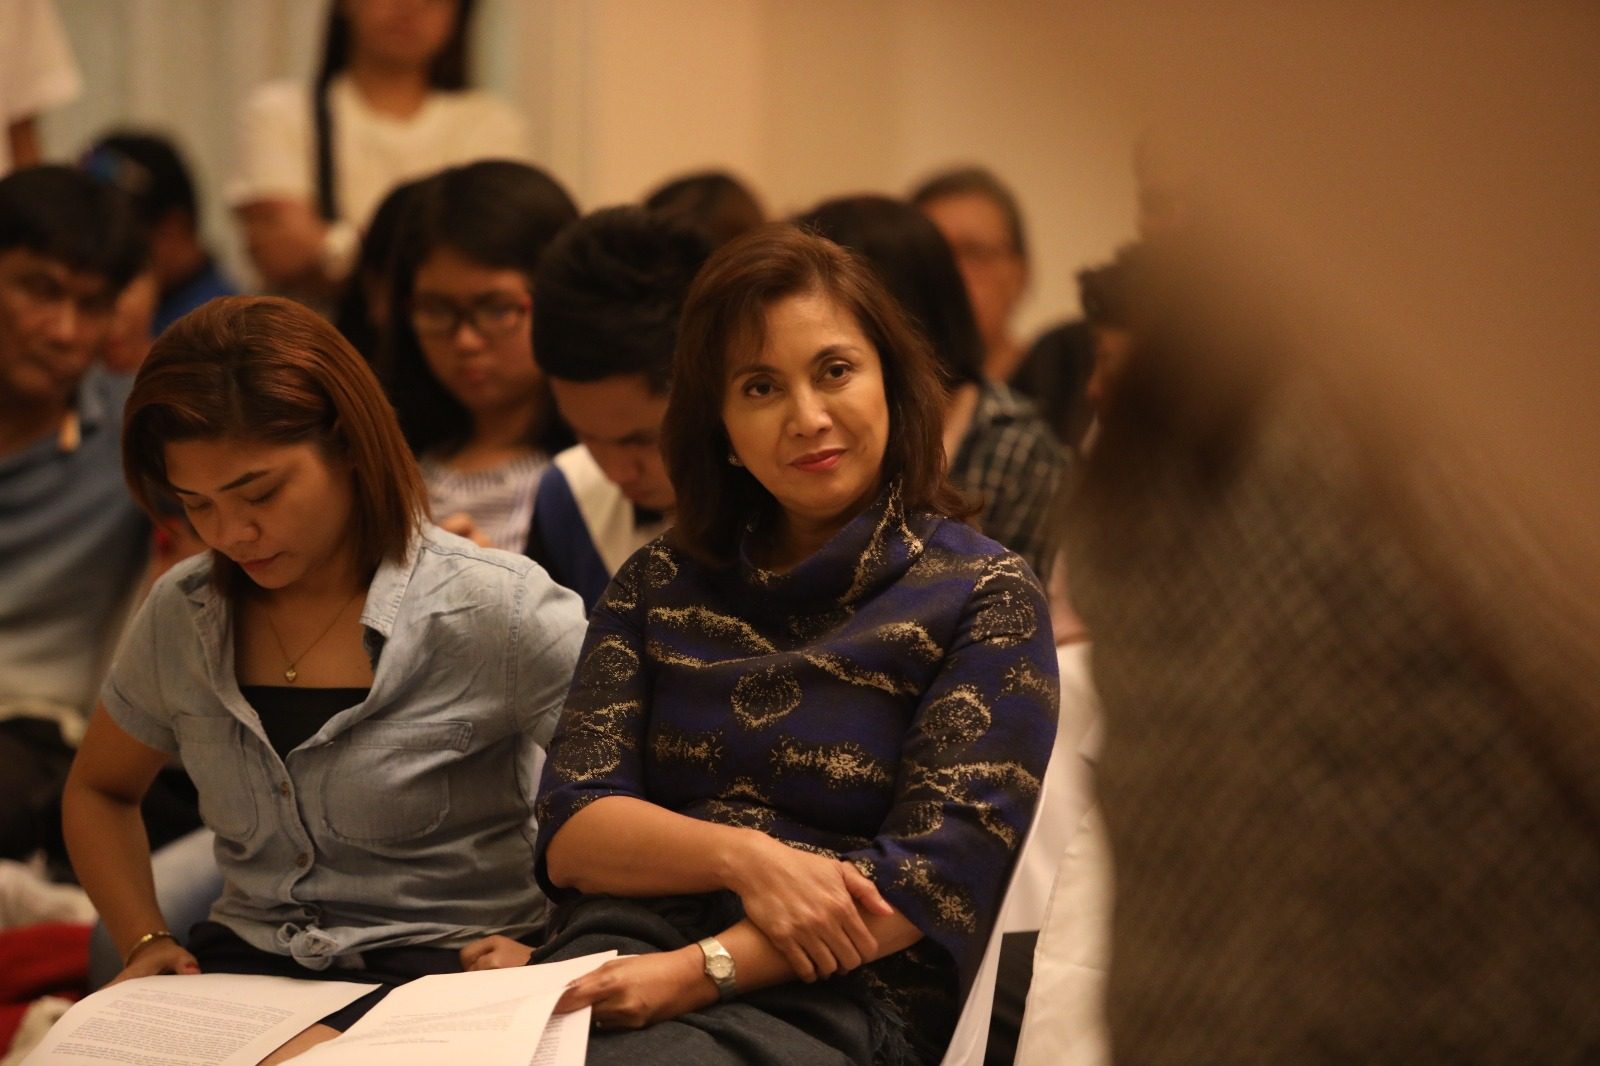 Robredo headed to South Africa for women’s conference